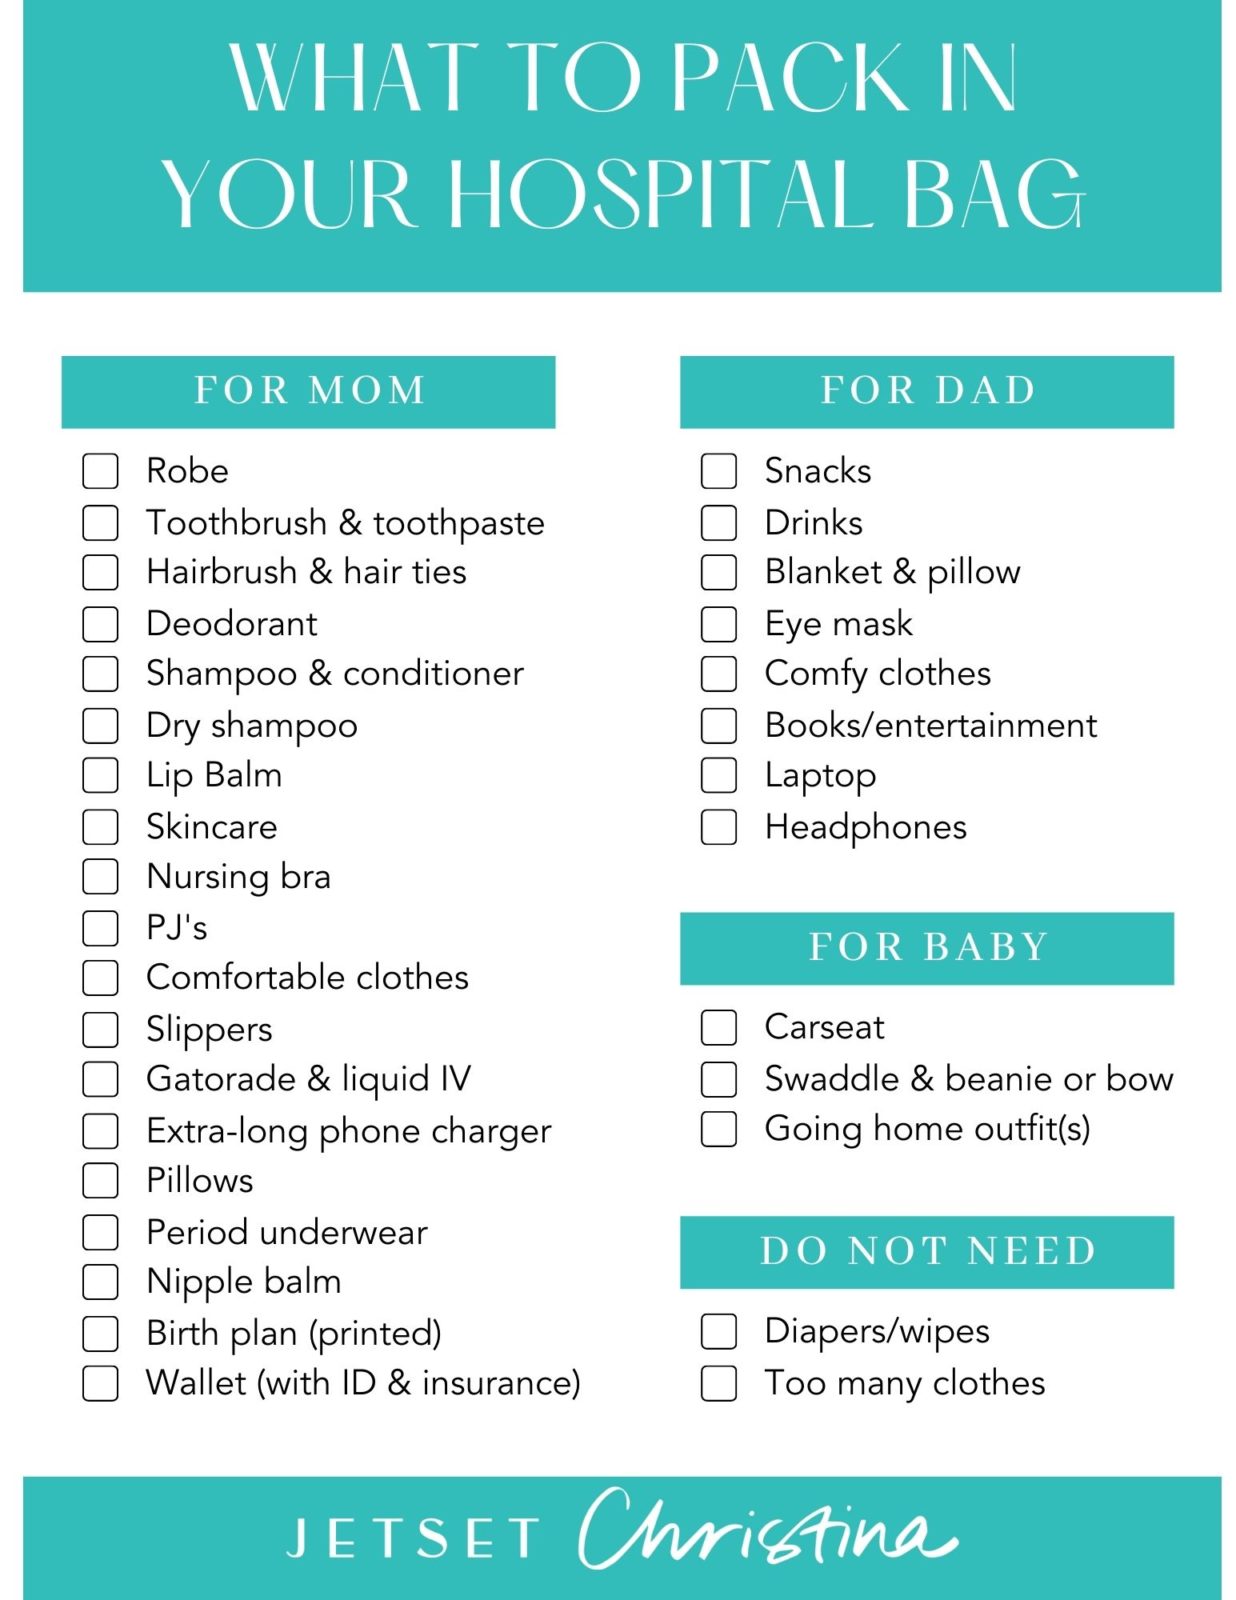 Hospital Bag Checklist: What to Pack